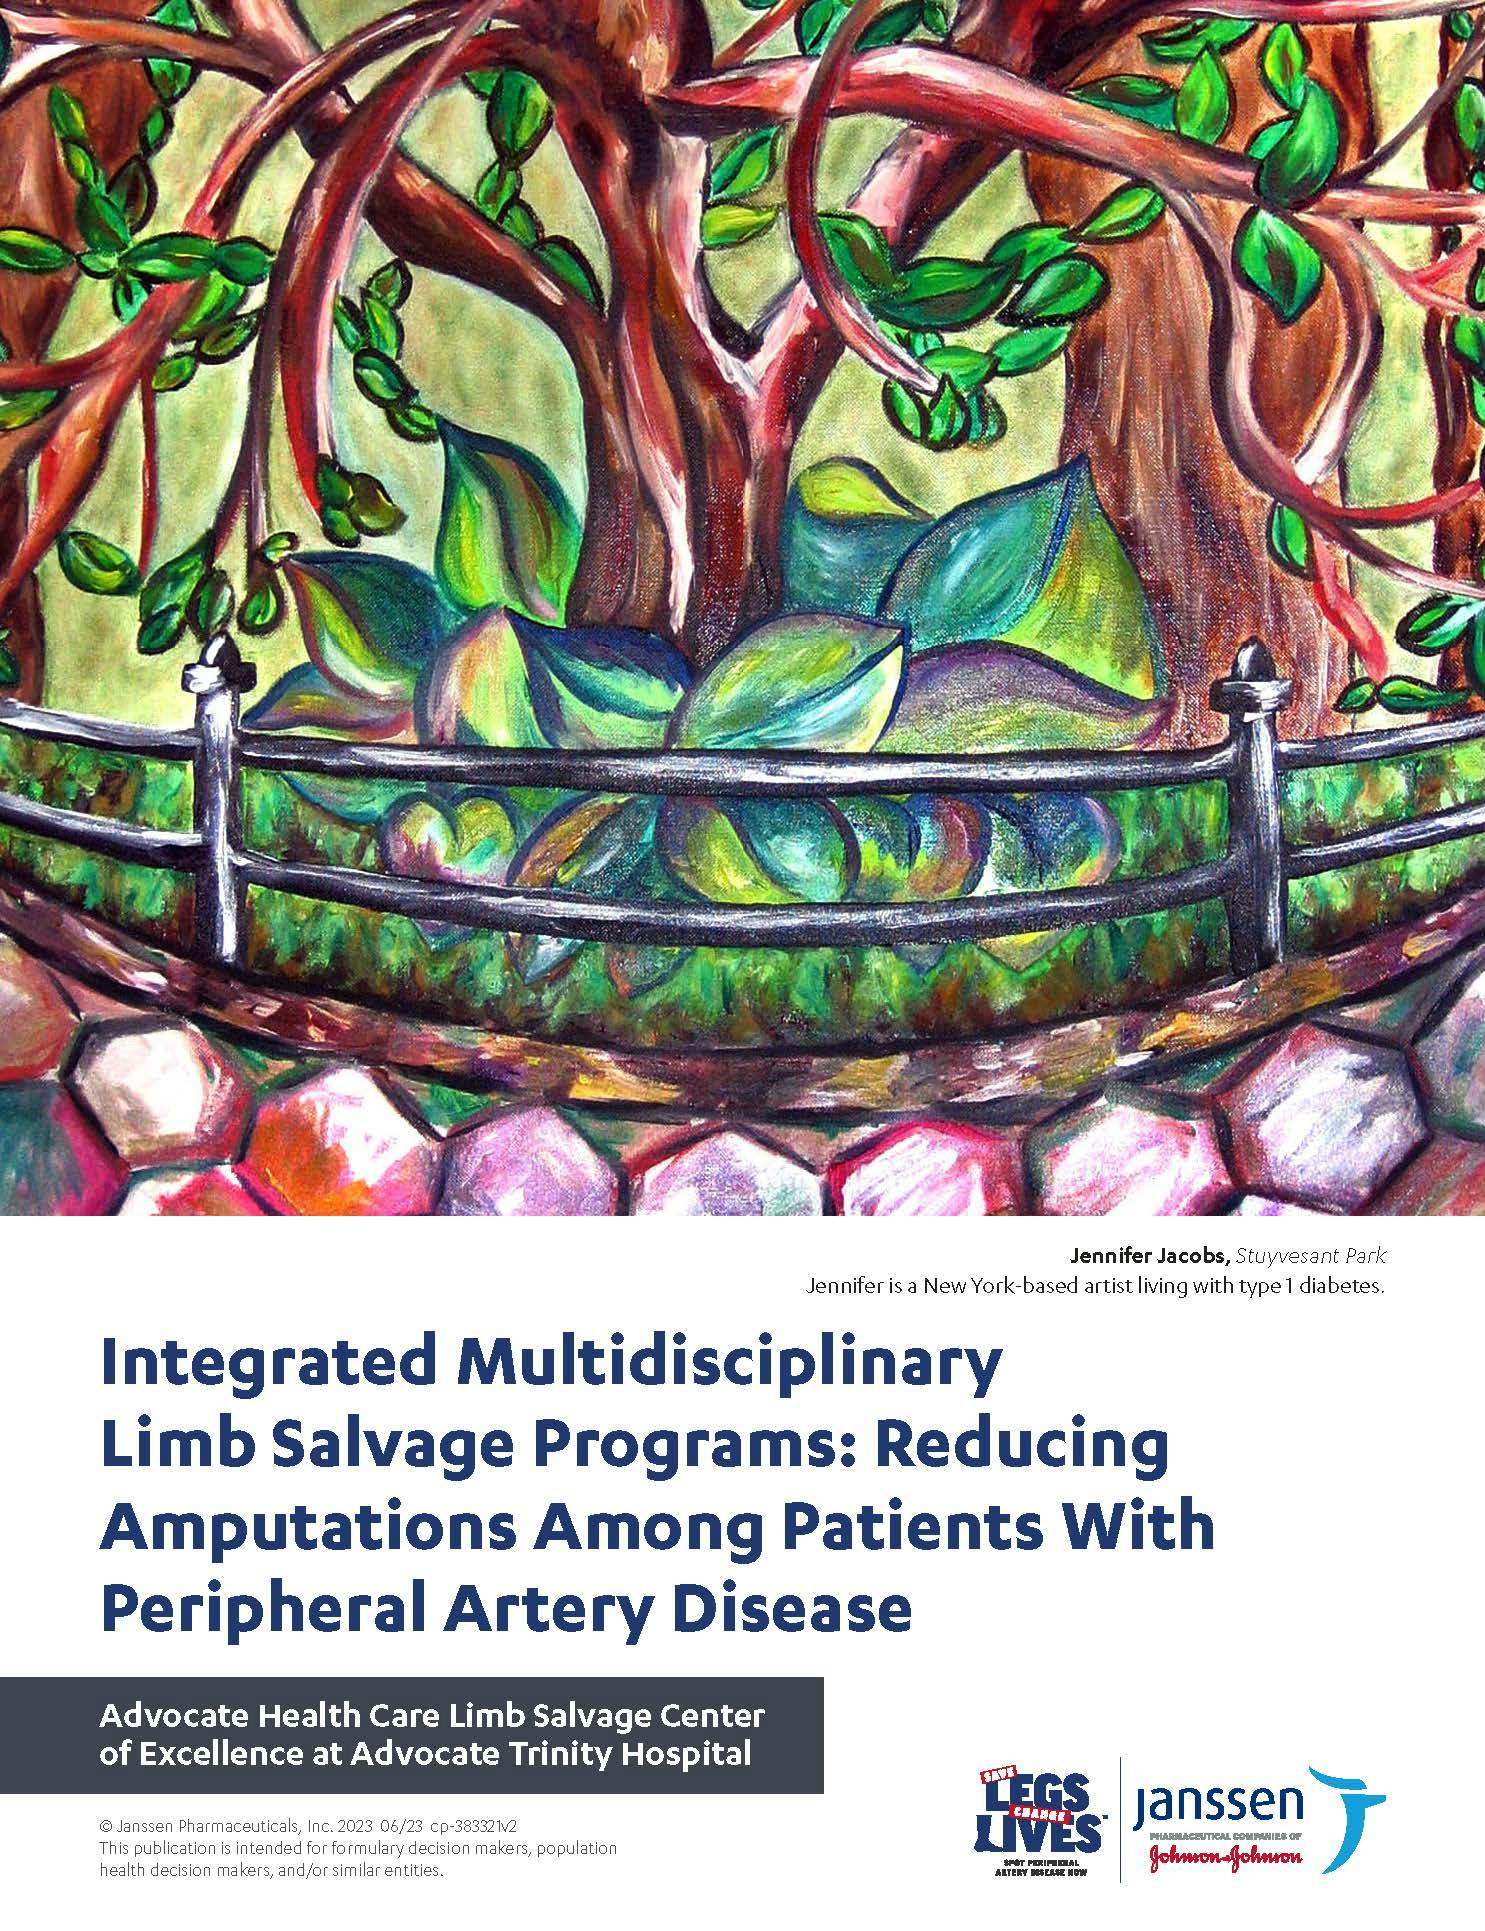 Integrated Multidisciplinary Limb Salvage Programs: Reducing Amputations Among Patients With Peripheral Artery Disease